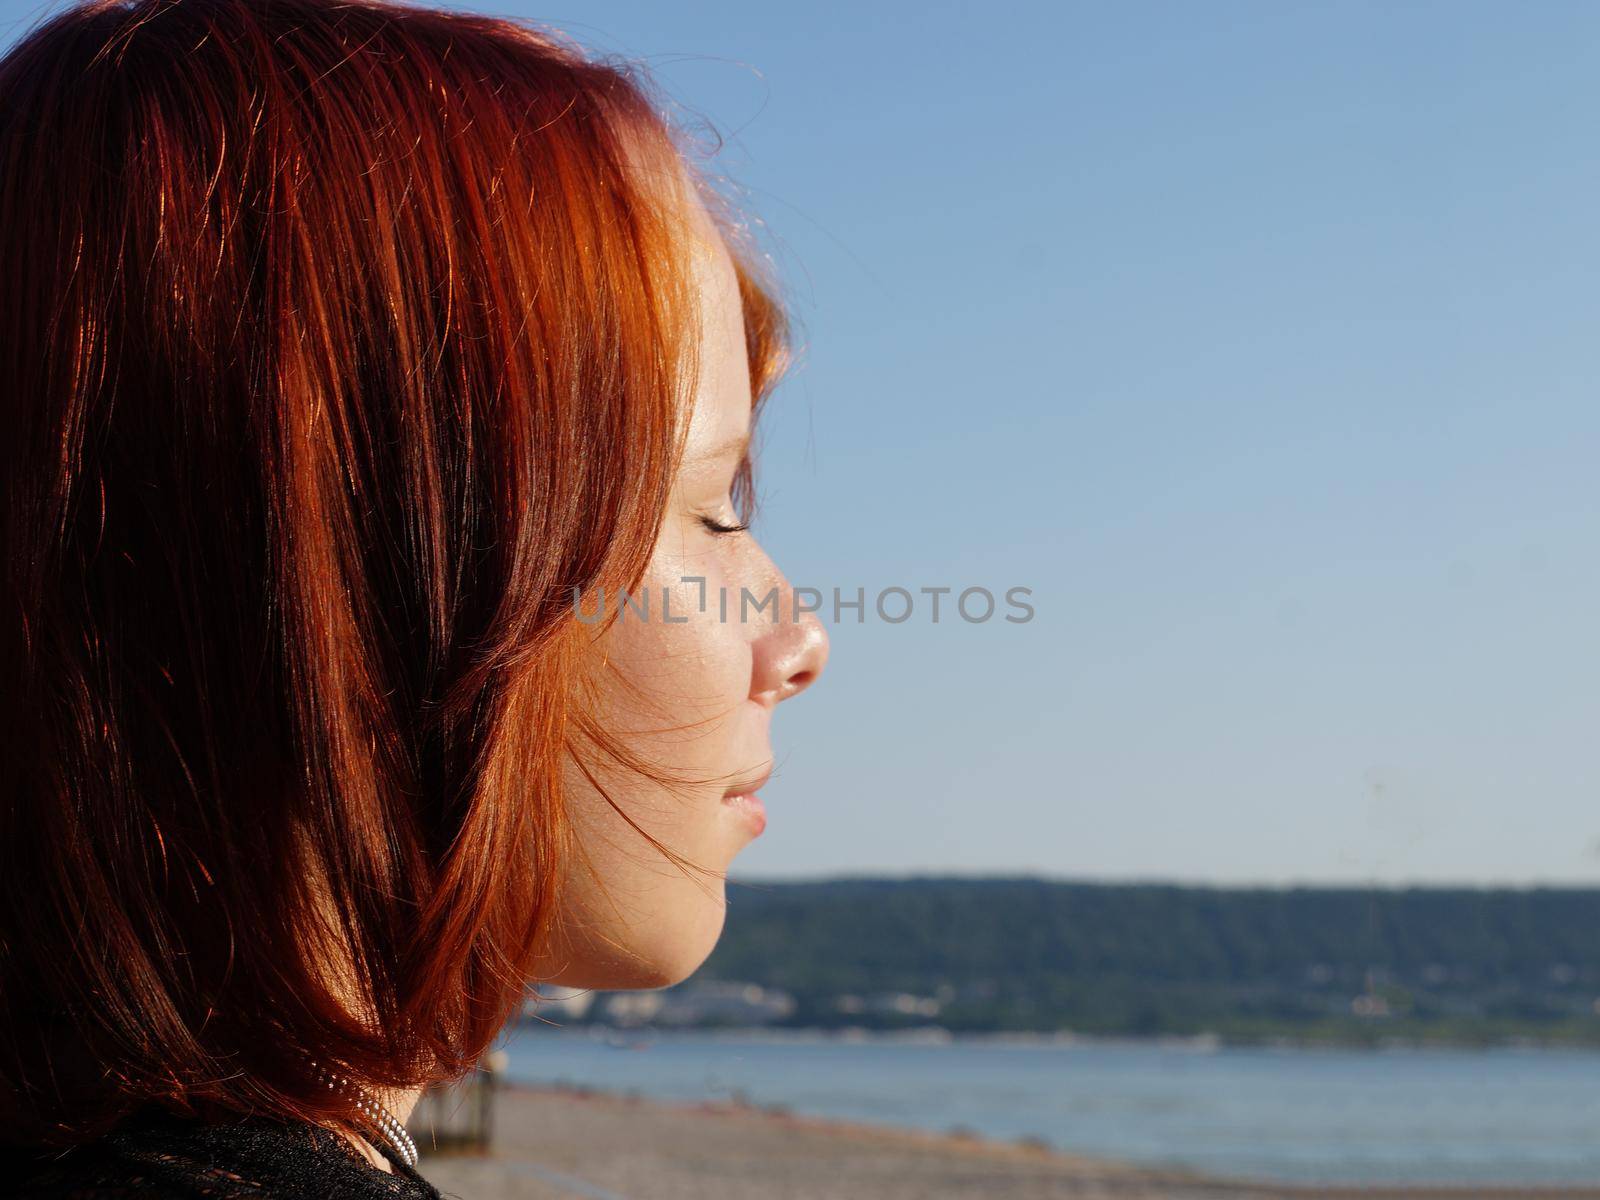 profile of a red-haired teenage girl with closed eyes close-up against the background of the sea, copy space.